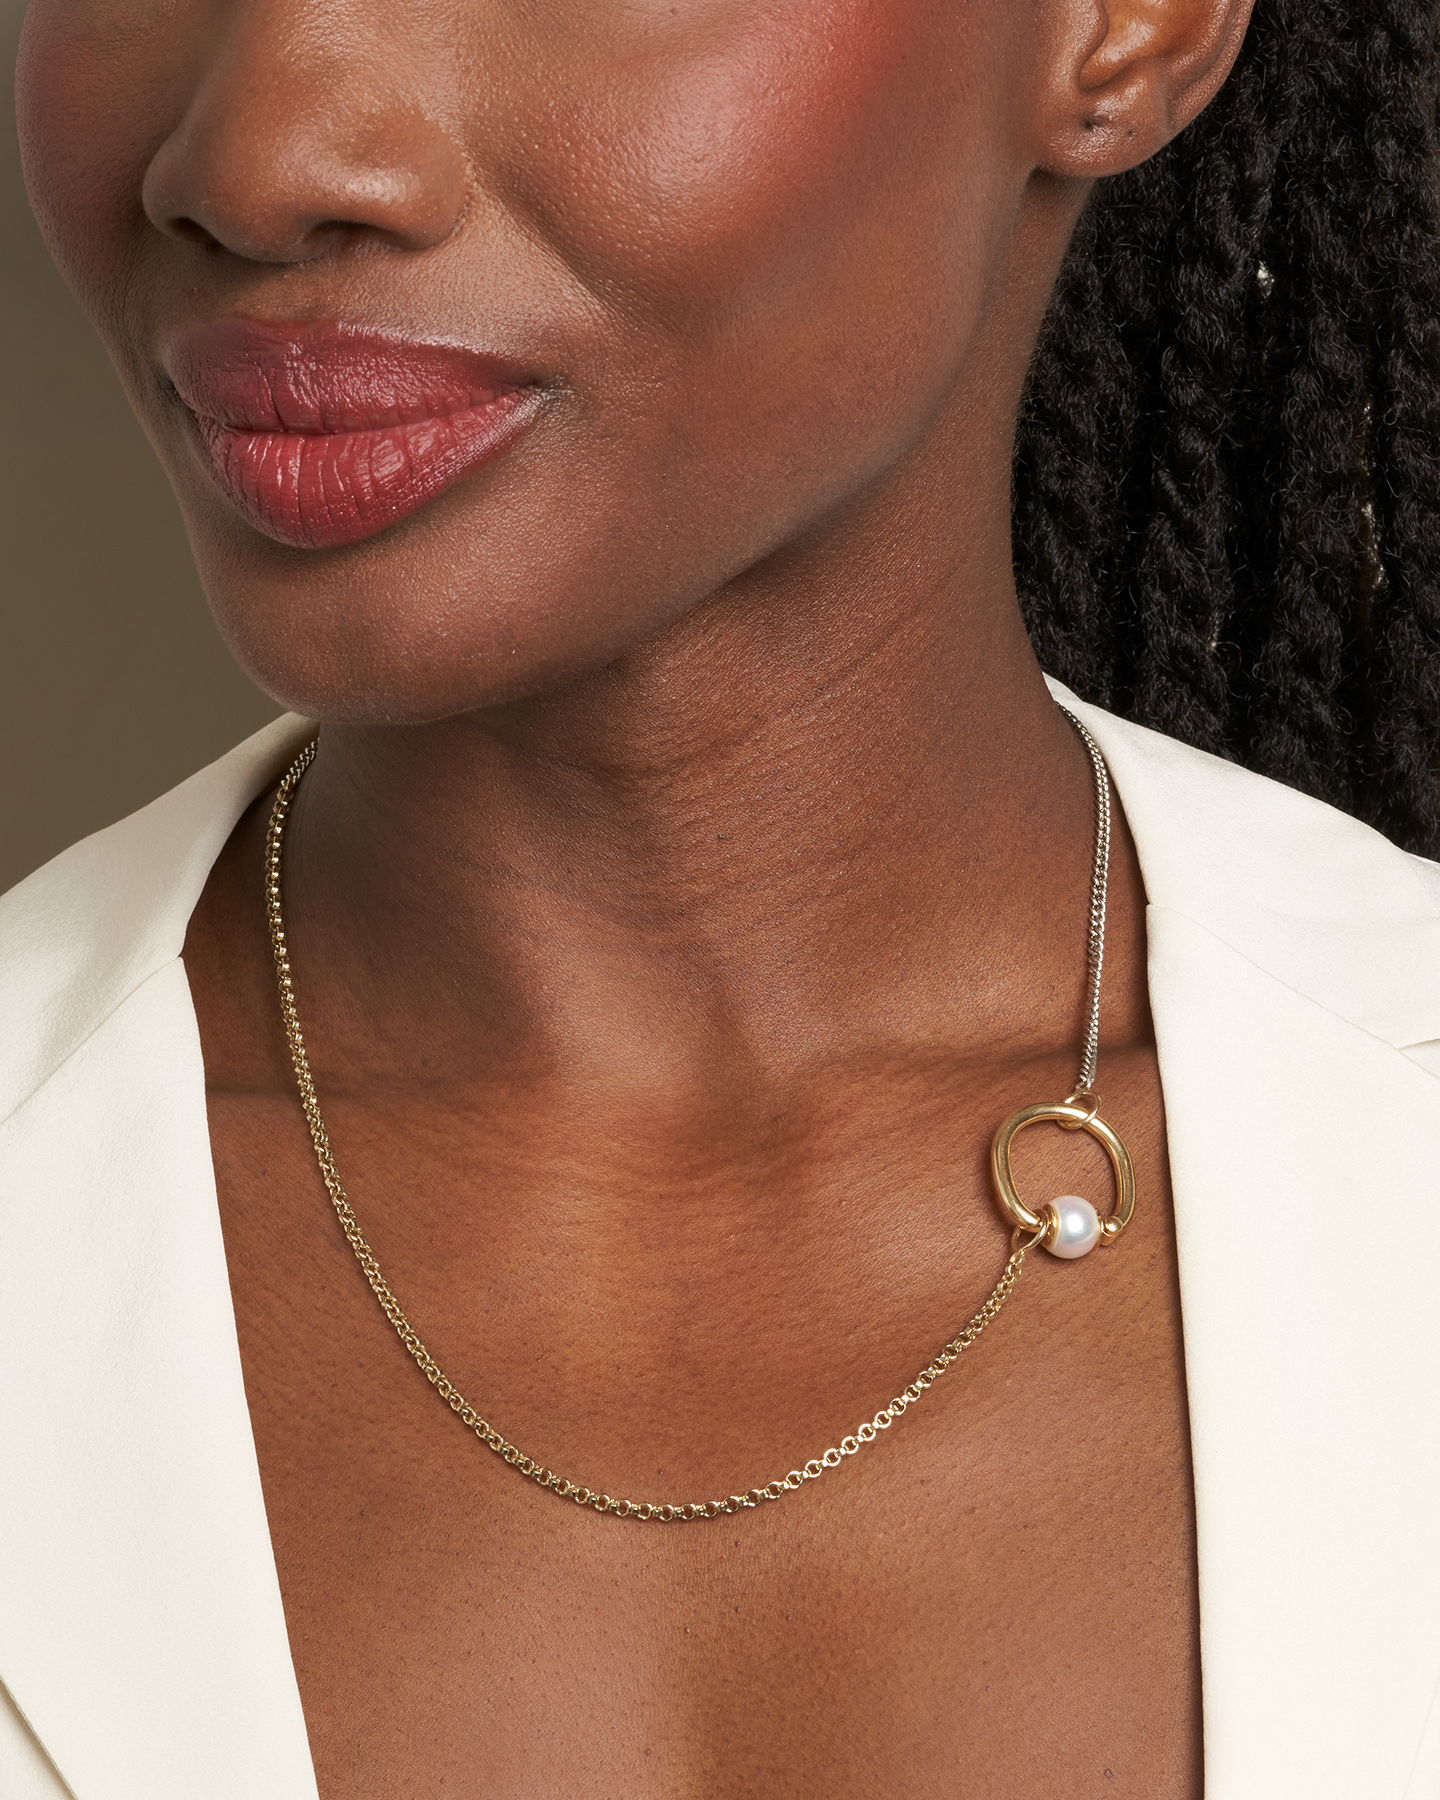 Close up of woman's decolletage with dainty gold and silver necklace and pearl spin ring 